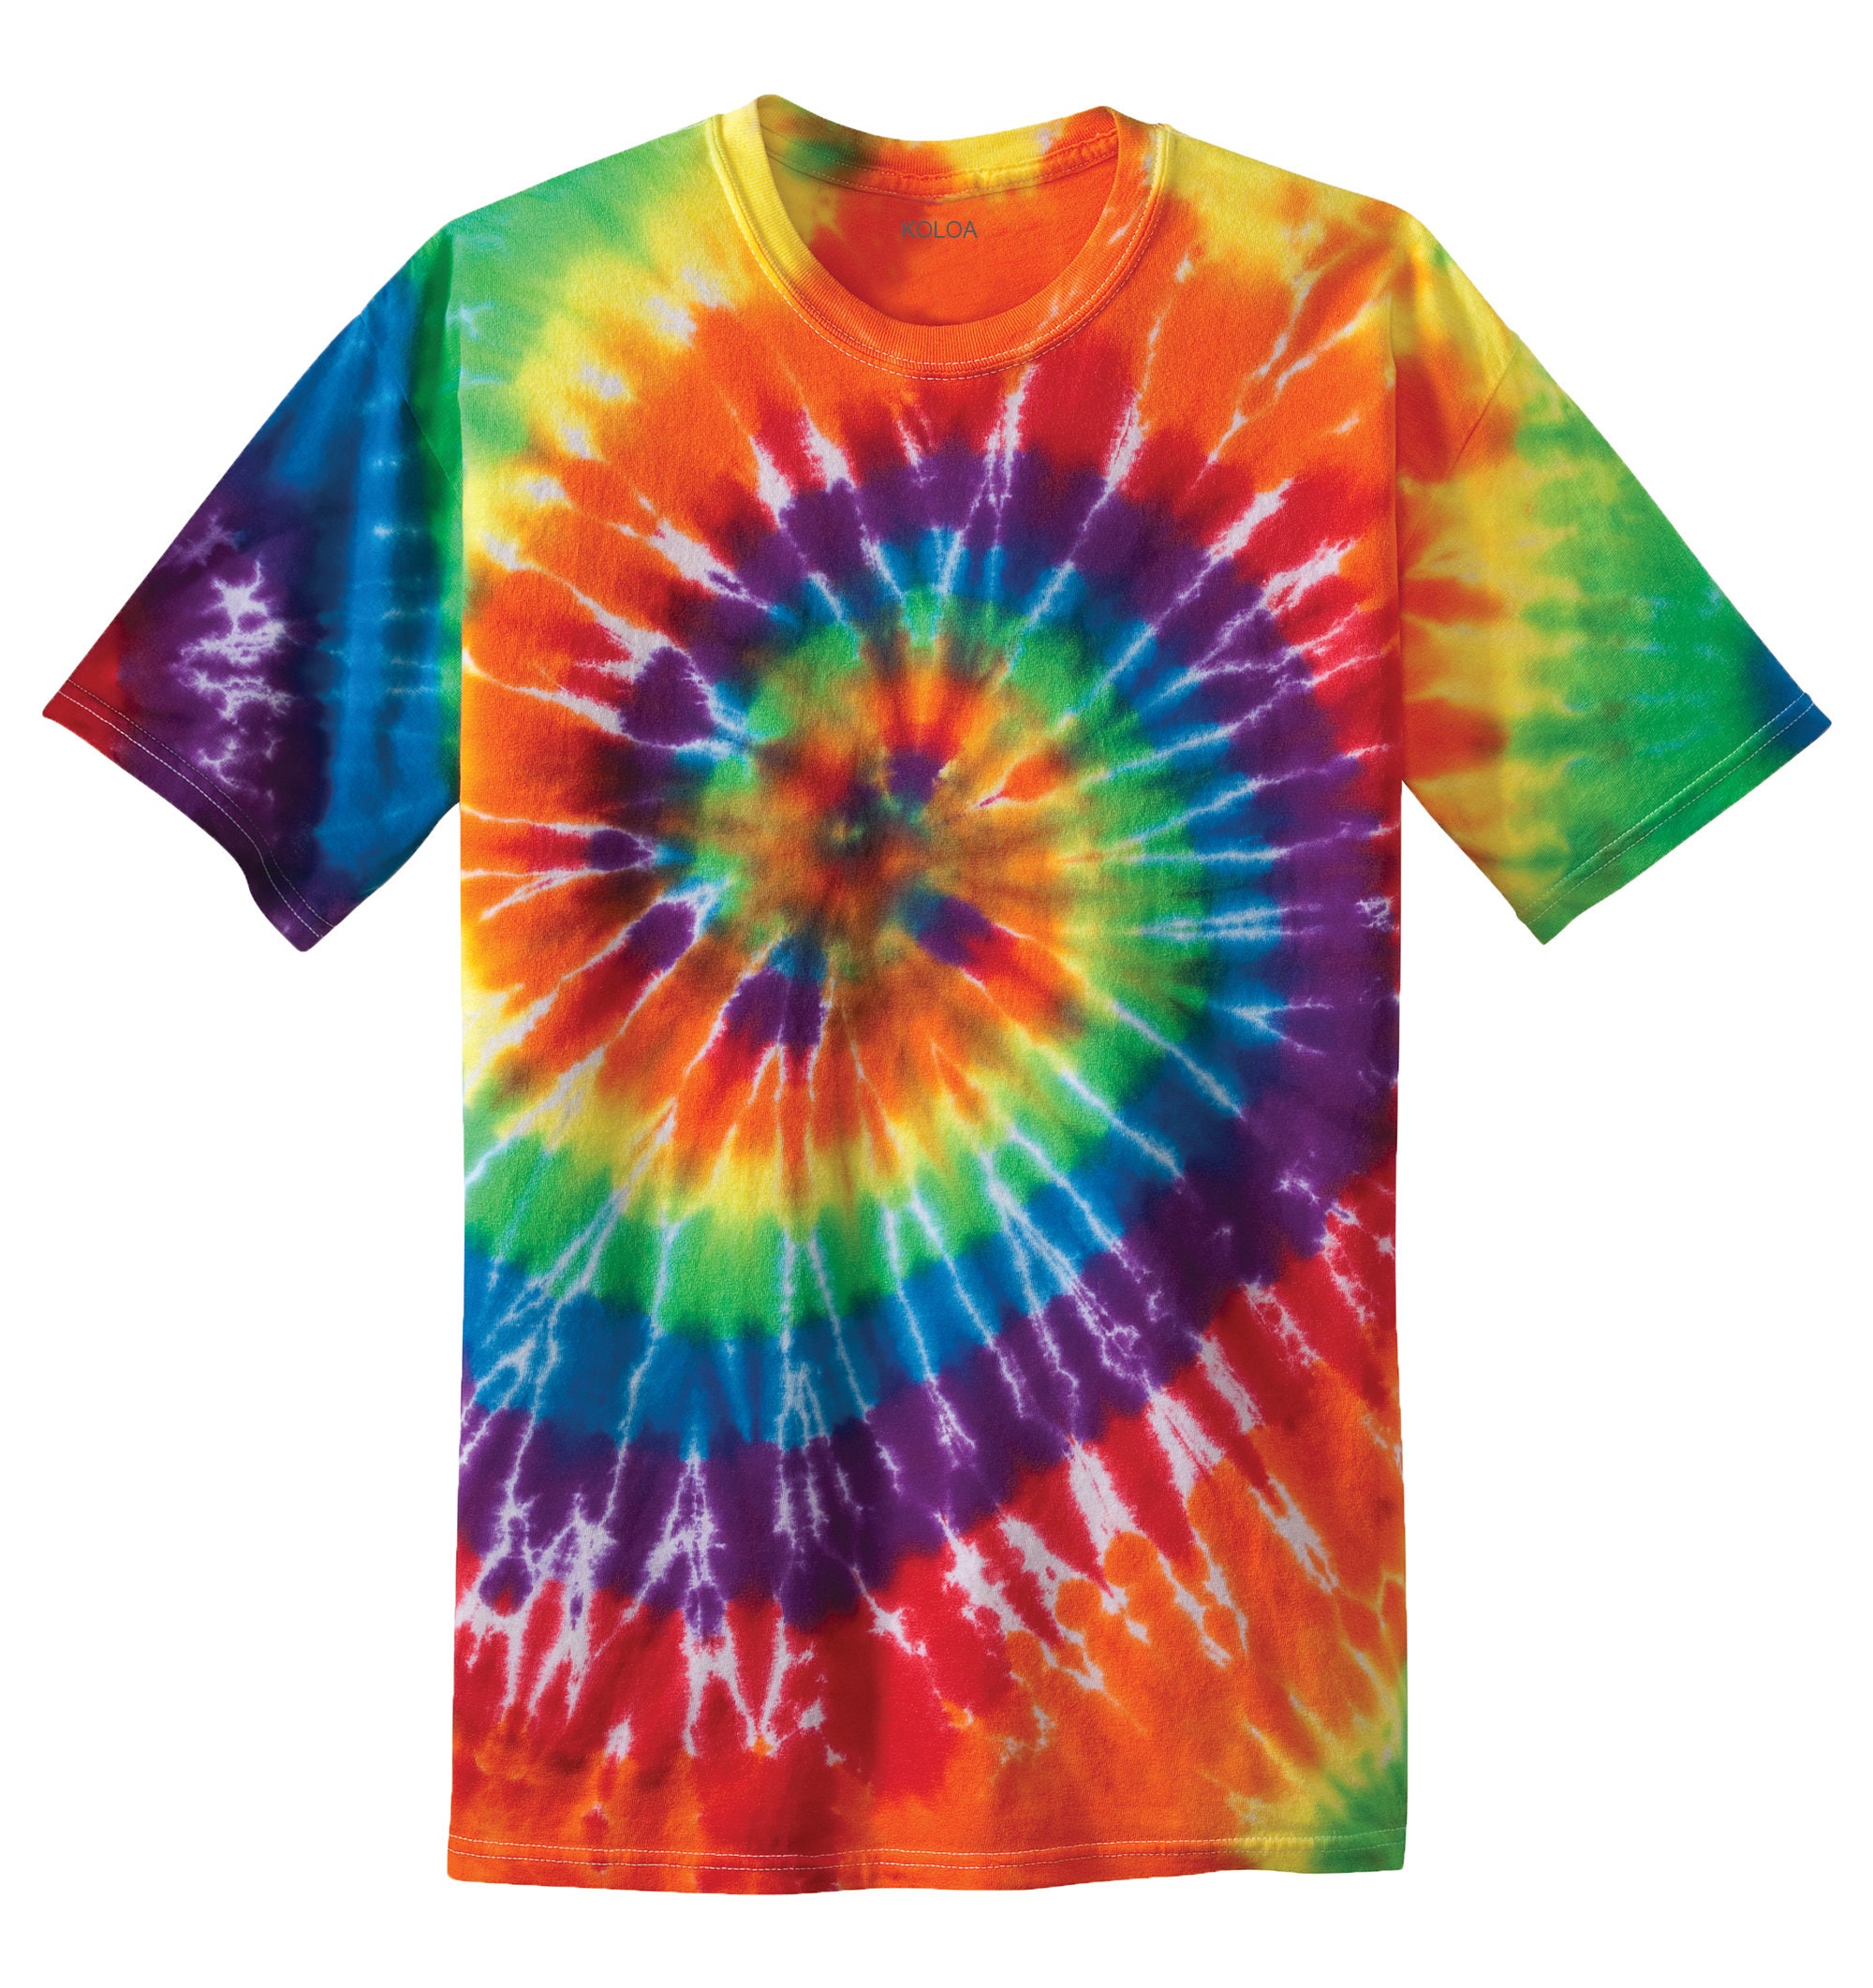 S-4XL Koloa Surf Co Colorful Tie-Dye T-Shirts in 17 Colors Sizes